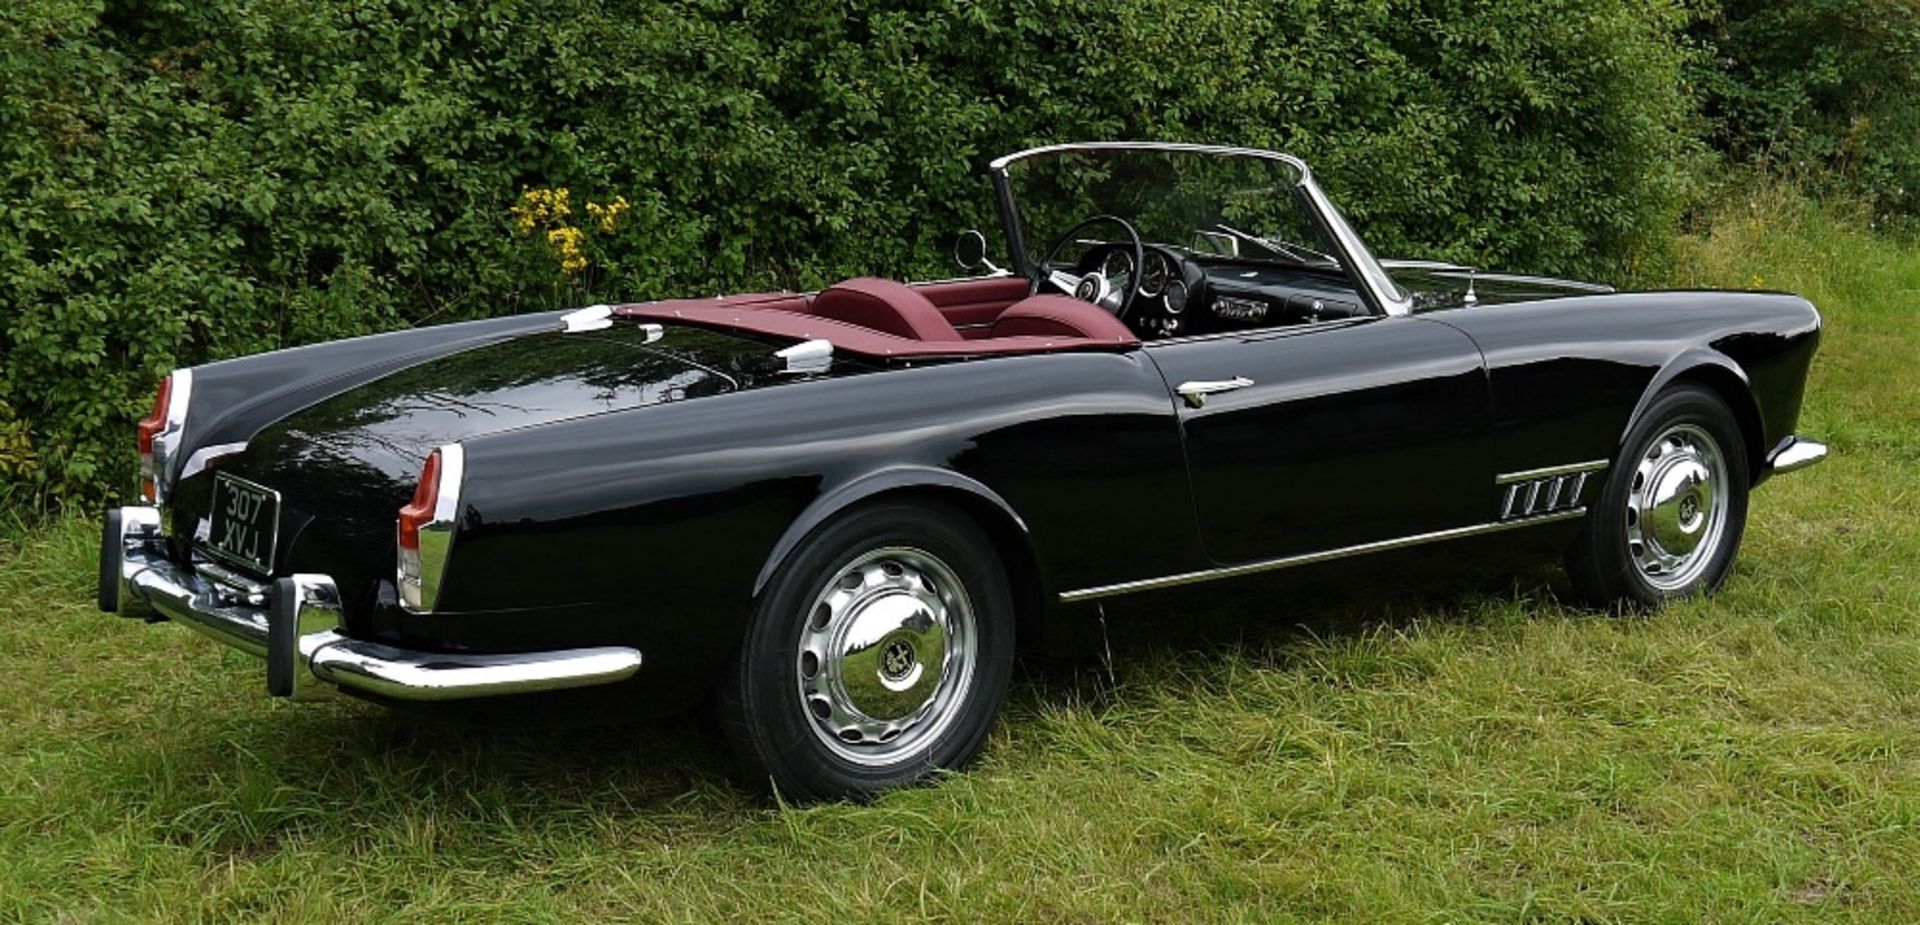 1960 ALFA ROMEO TOURING SPIDER Registration Number: 307 XVJ Chassis Number: AR*10204*000517 Recorded - Image 8 of 36